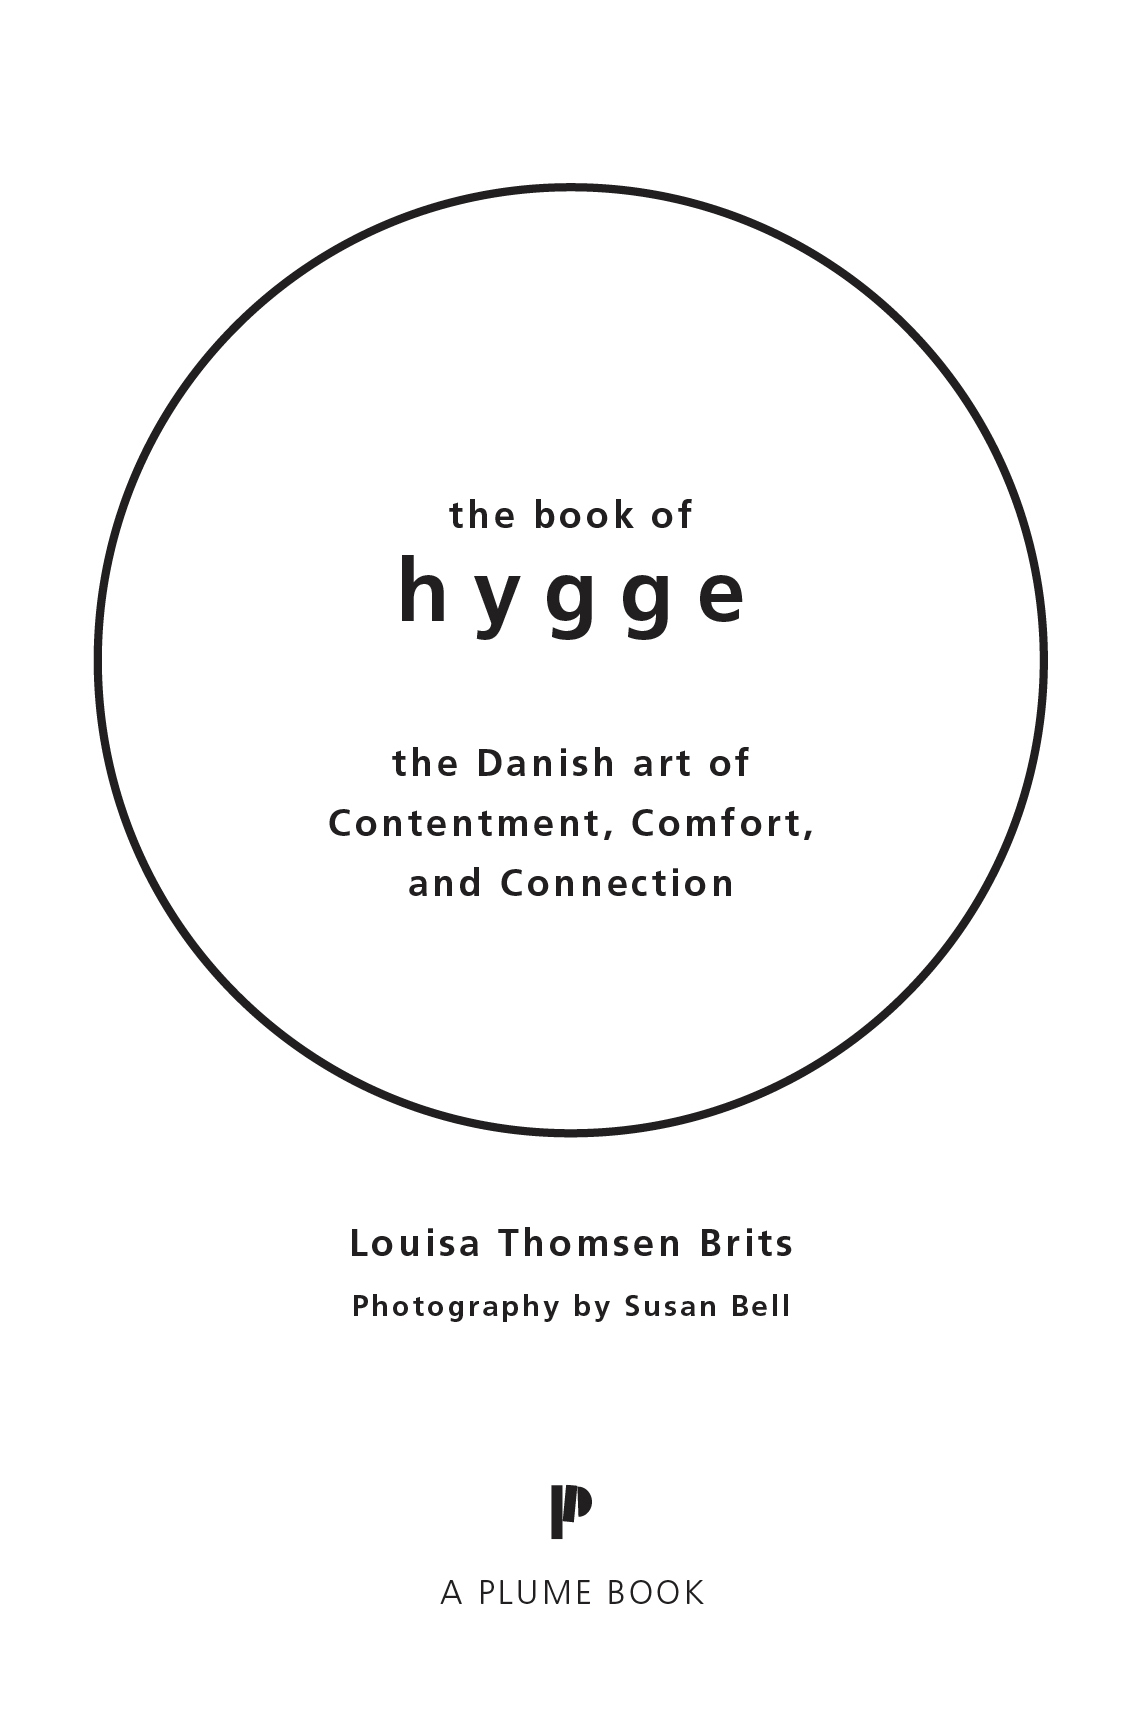 The book of hygge the Danish art of contentment comfort and connection - image 4